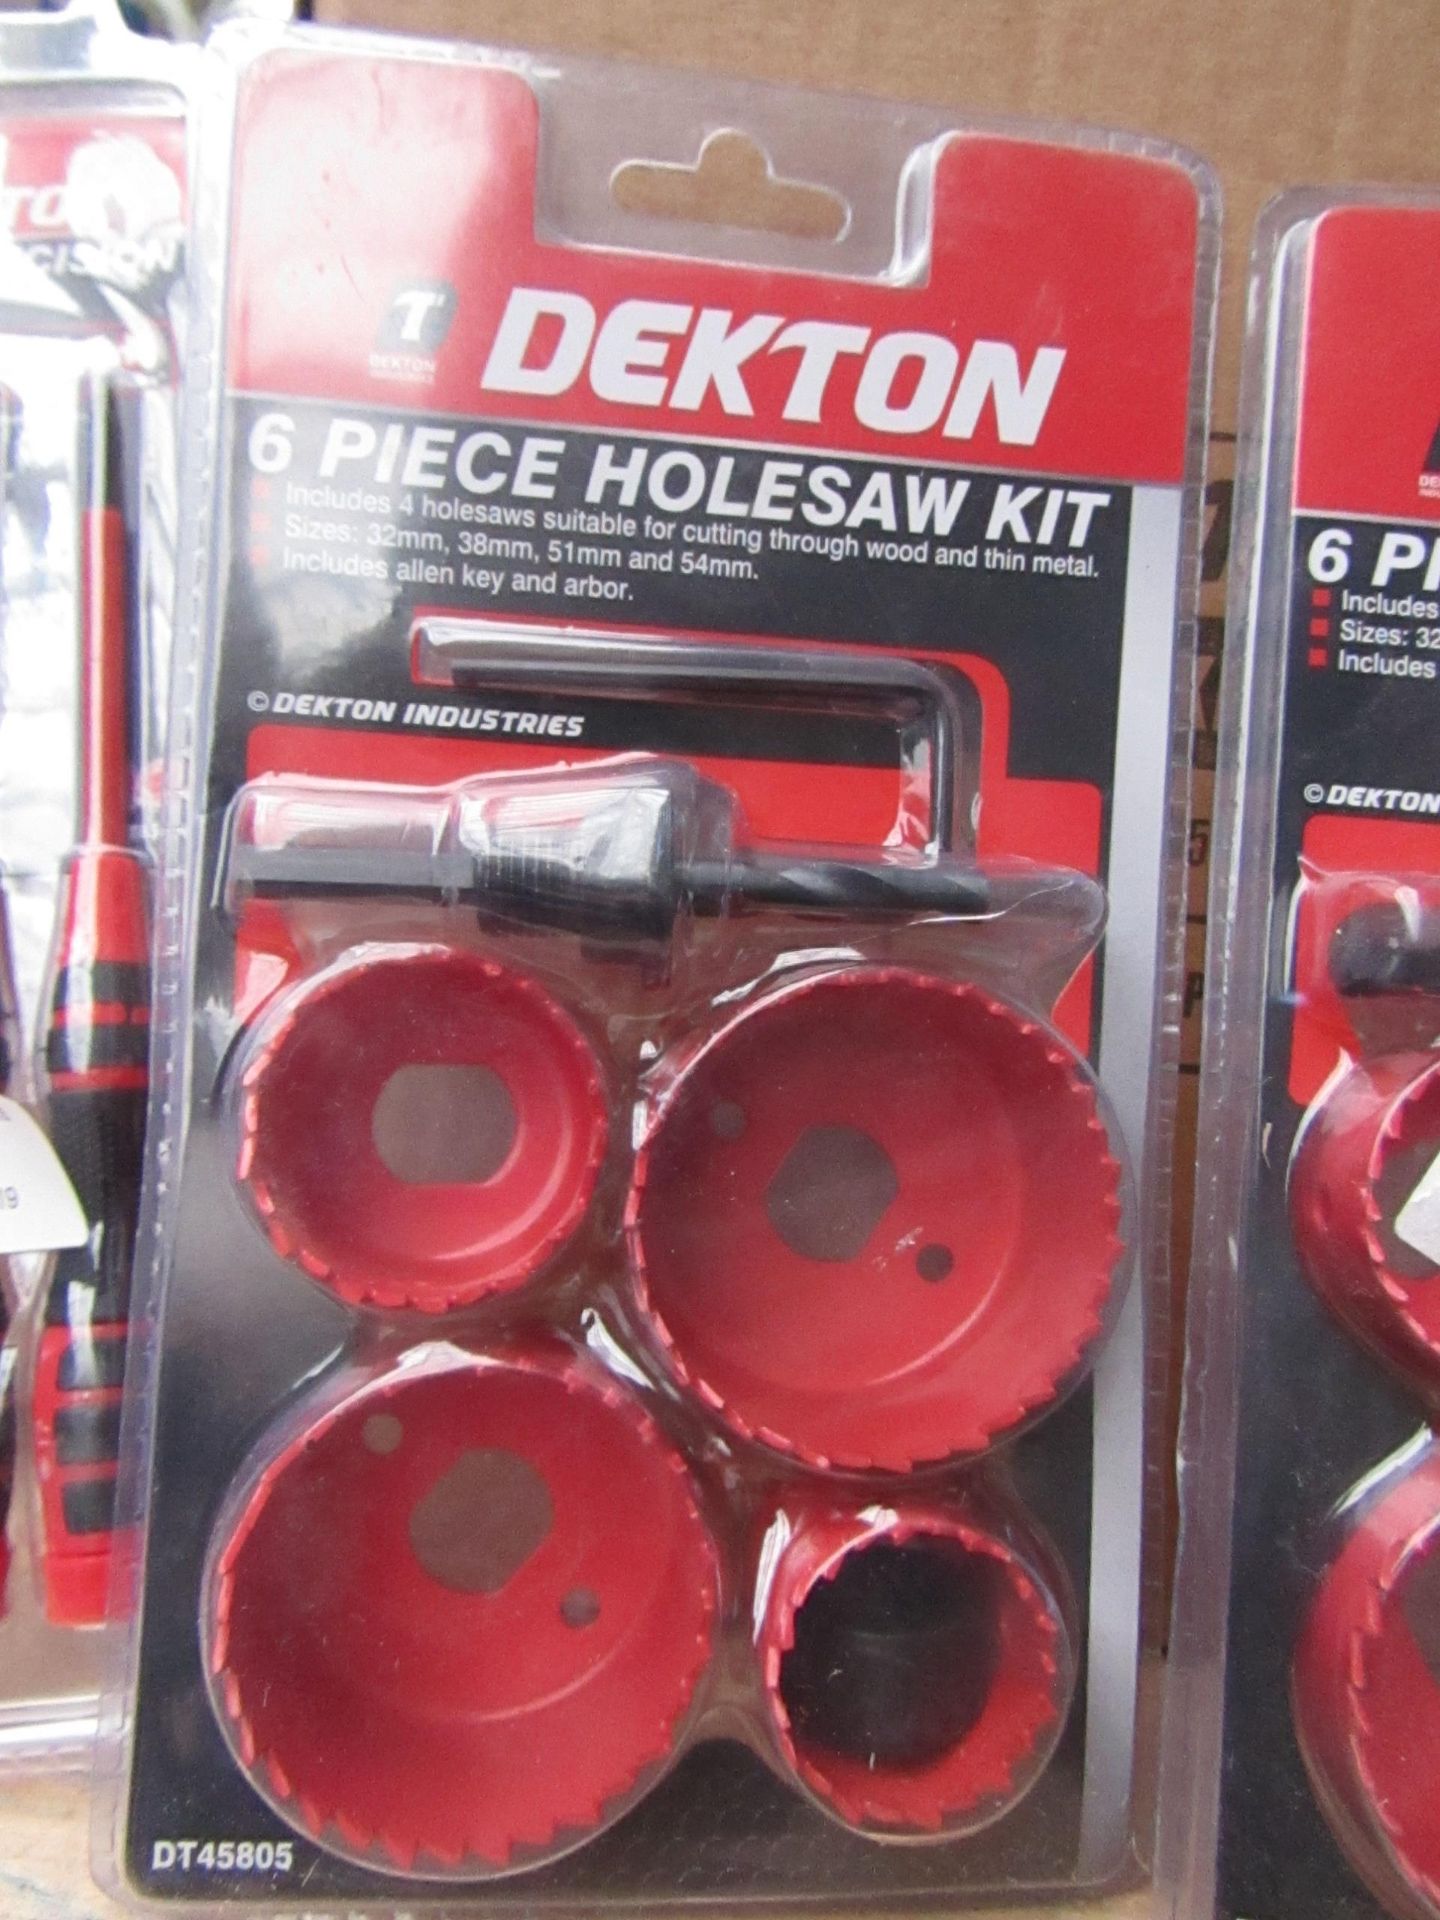 Dekton 6 piece holesaw set, new and packaged.